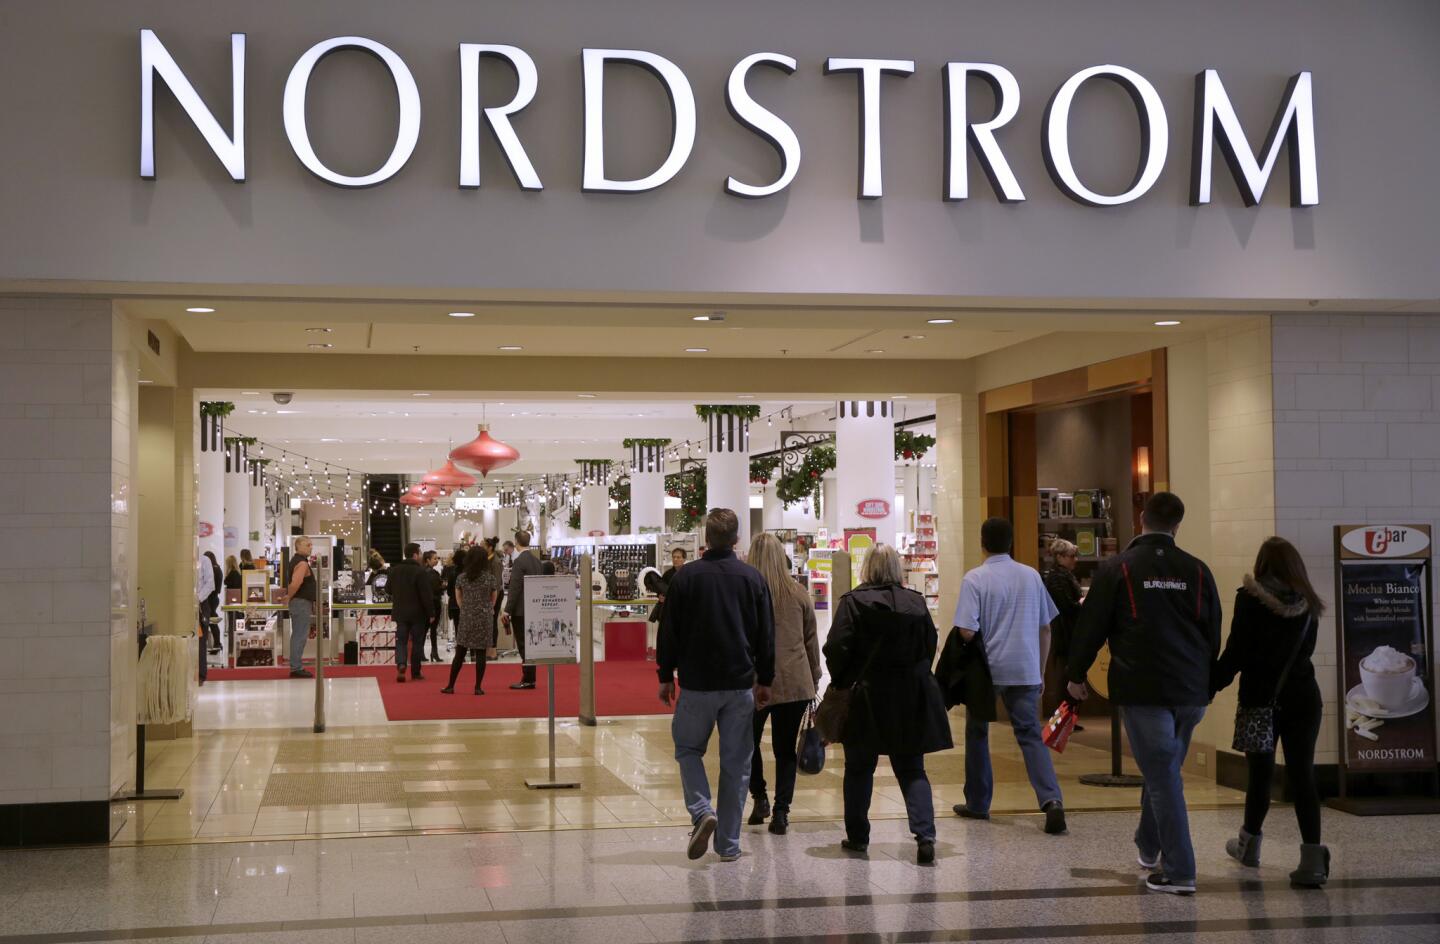 The Nordstrom store in the Shops at North Bridge shopping center off North Michigan Avenue reopened Sunday, two days after a fatal shooting inside the store. The store was closed Saturday.